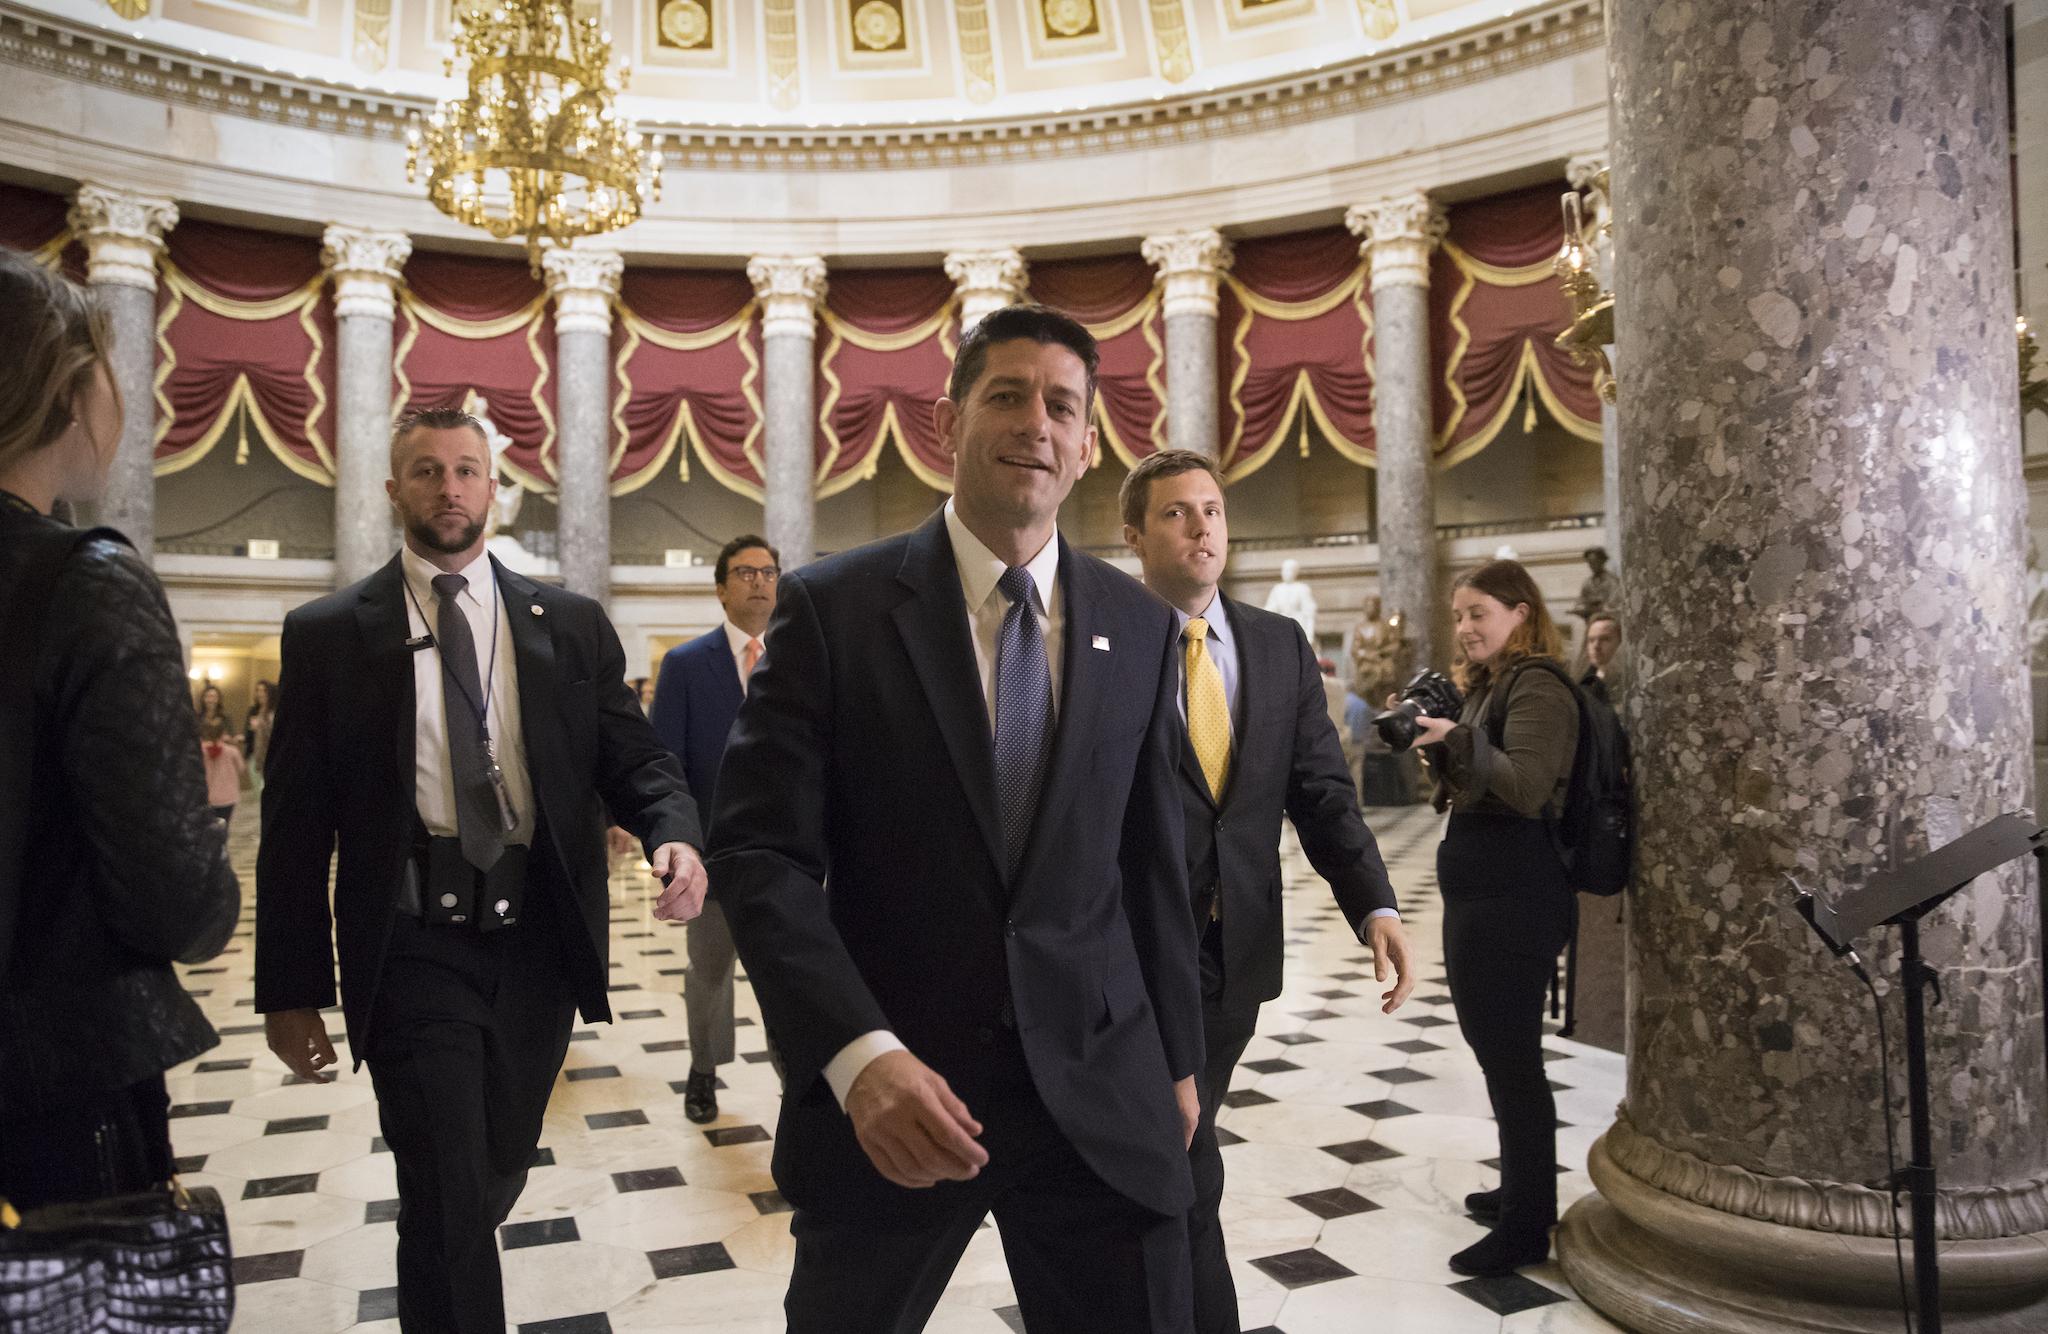 Speaker of the House Paul Ryan strides to the chamber for the vote on the $4 trillion budget measure that will pave the way for a sweeping Republican tax overhaul